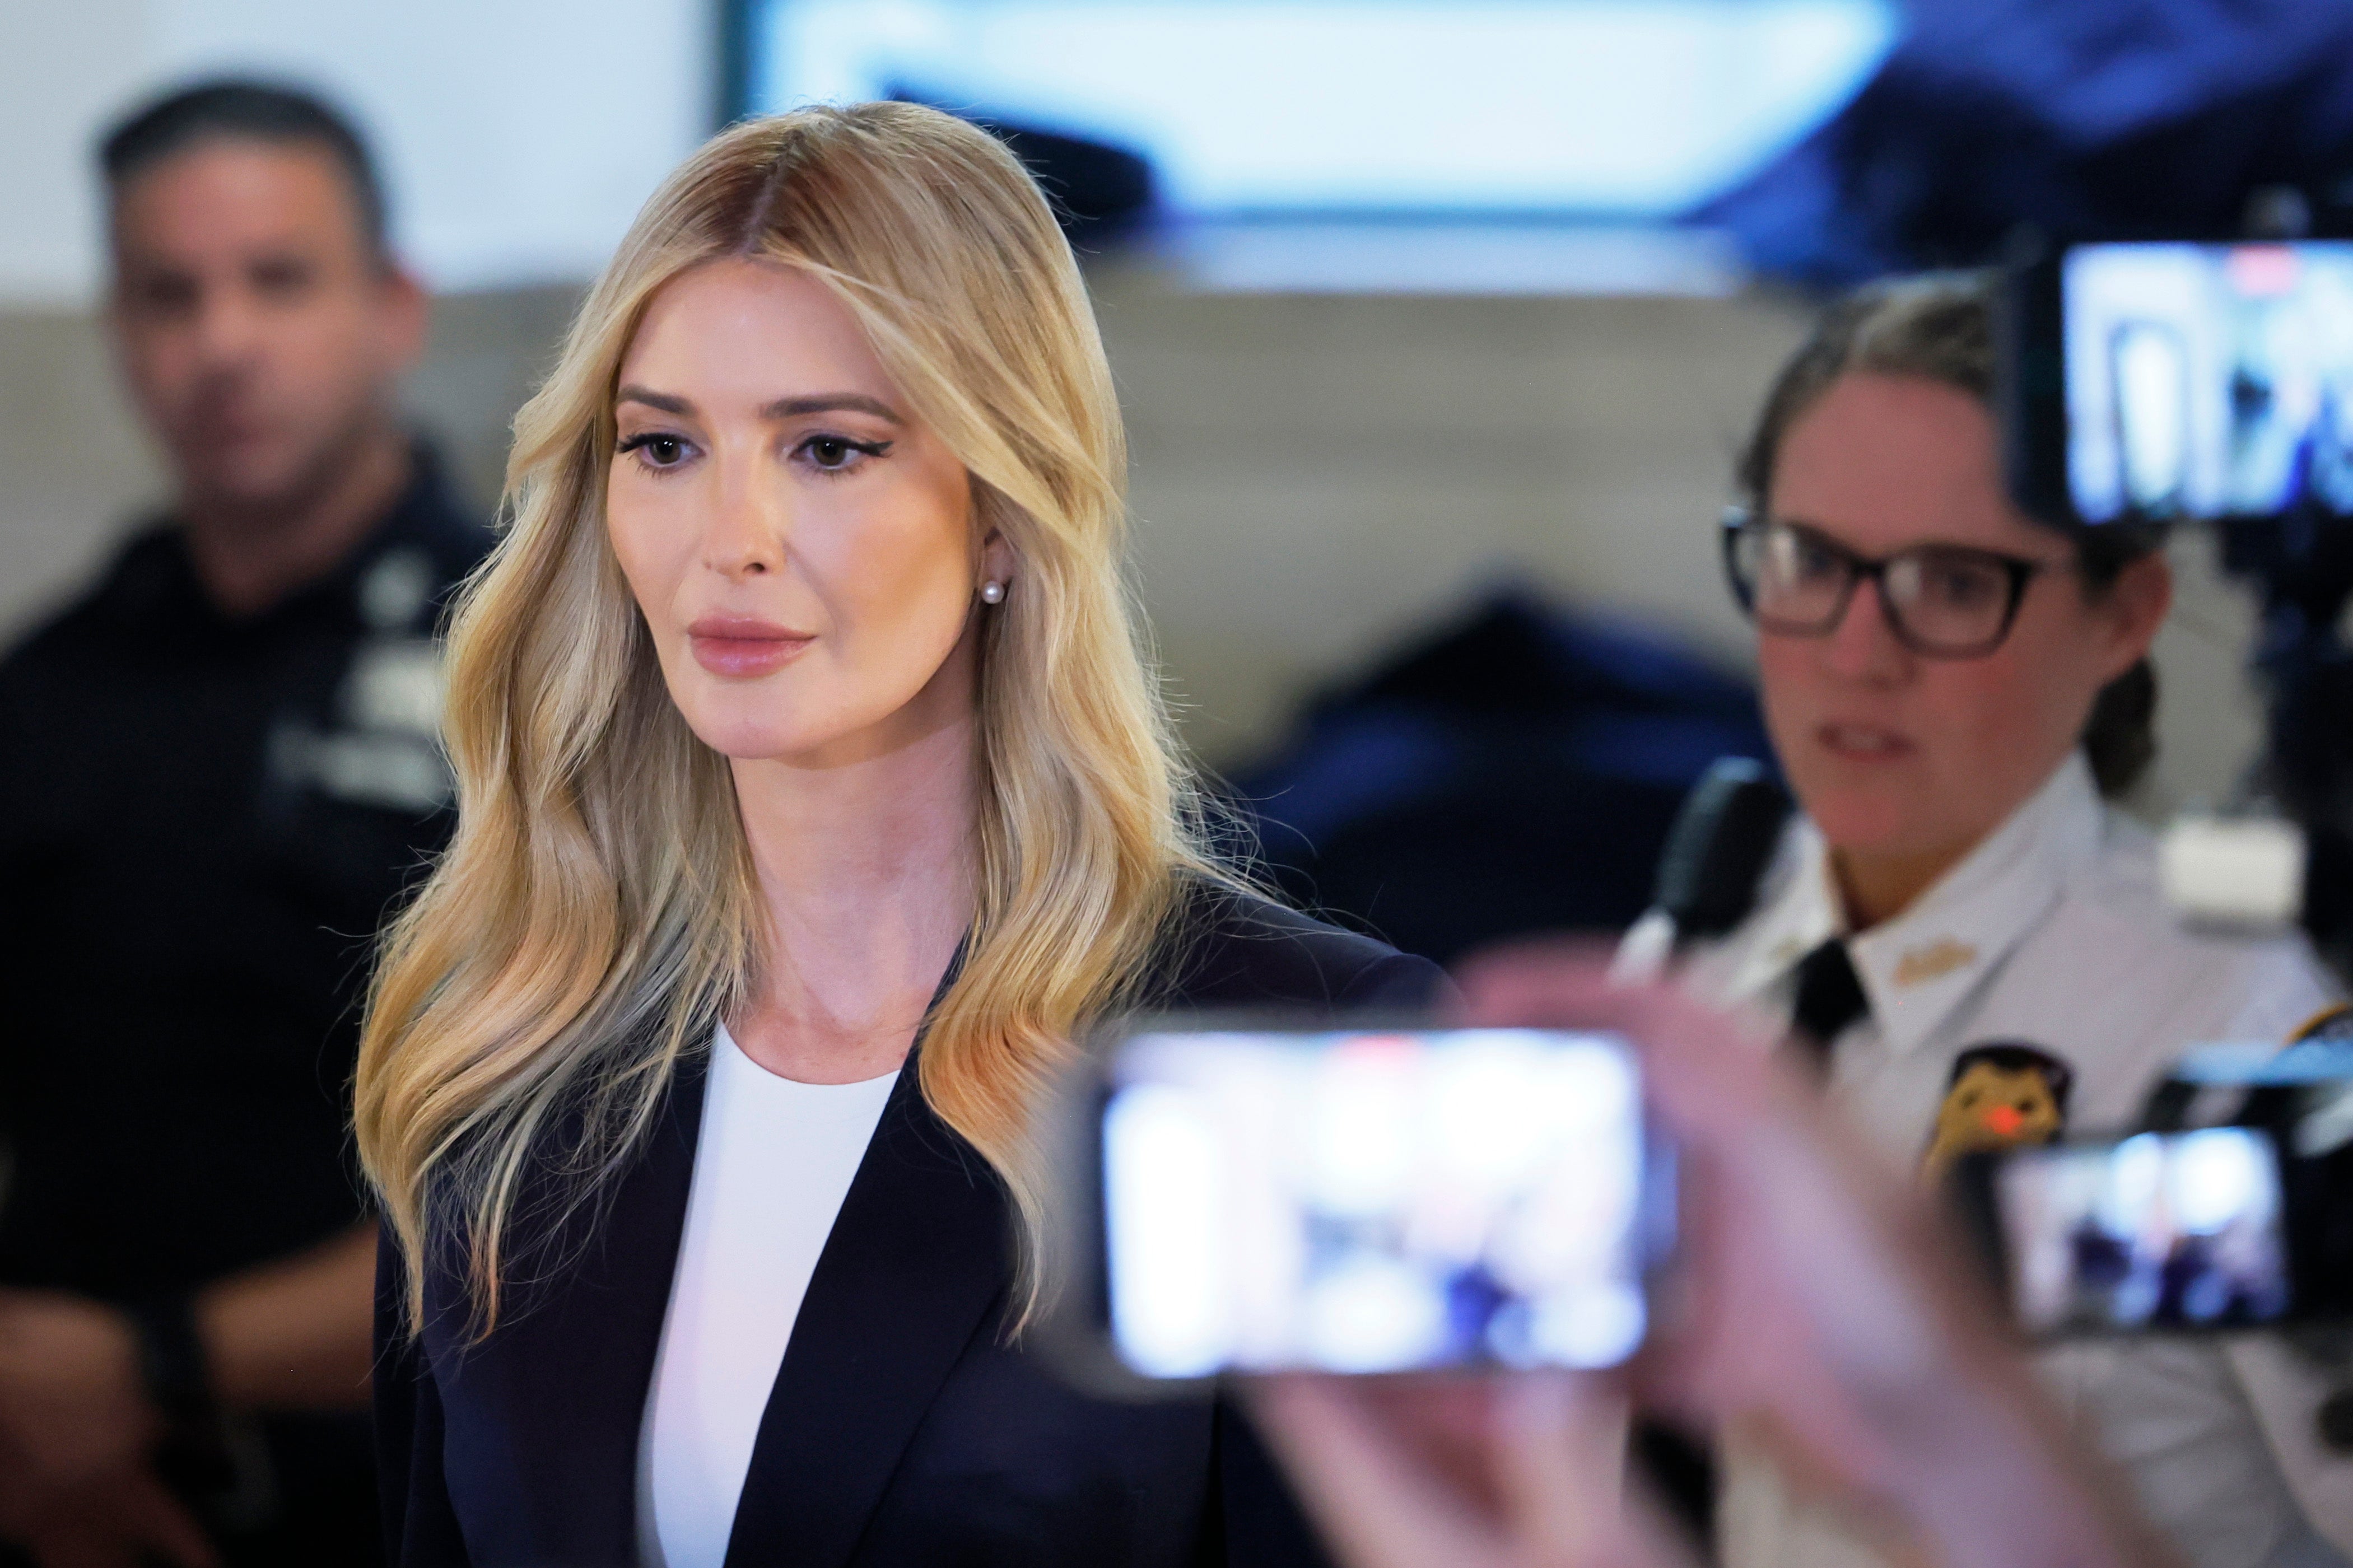 Ivanka Trump is the fourth member of the Trump family to testify in the trial